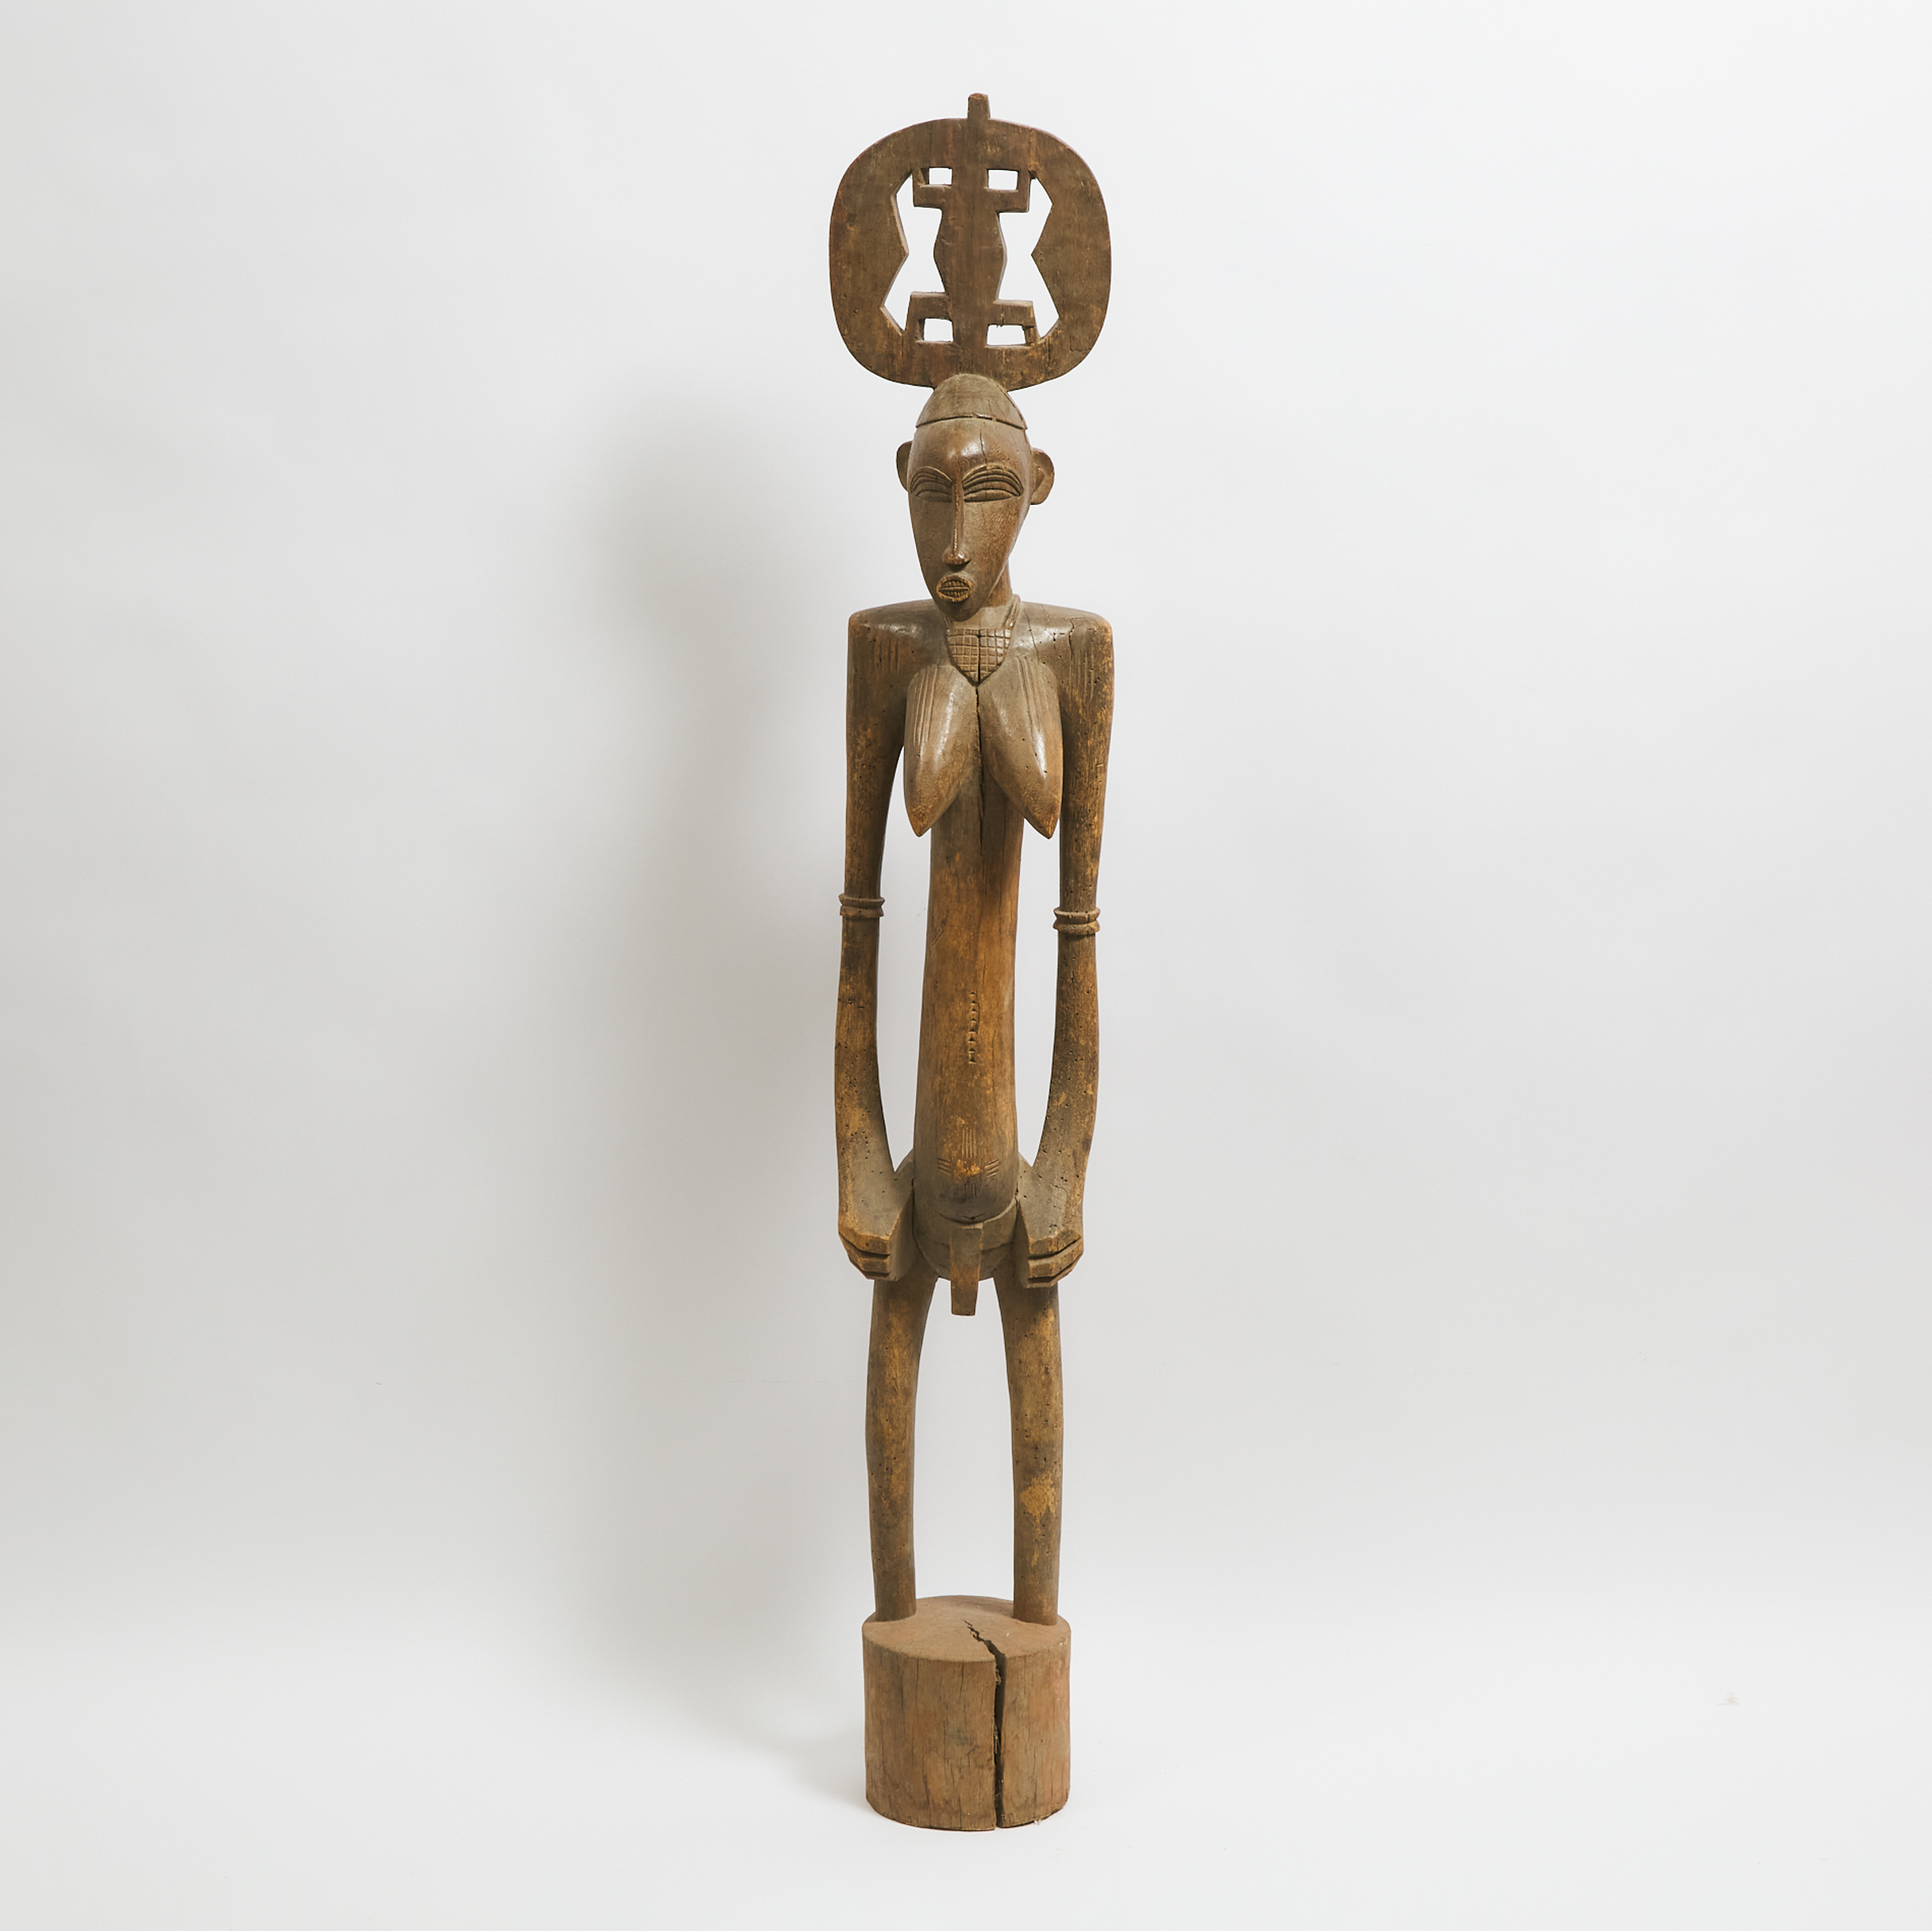 Large Senufo Carved Wood Female Figure, South Africa, 20th century